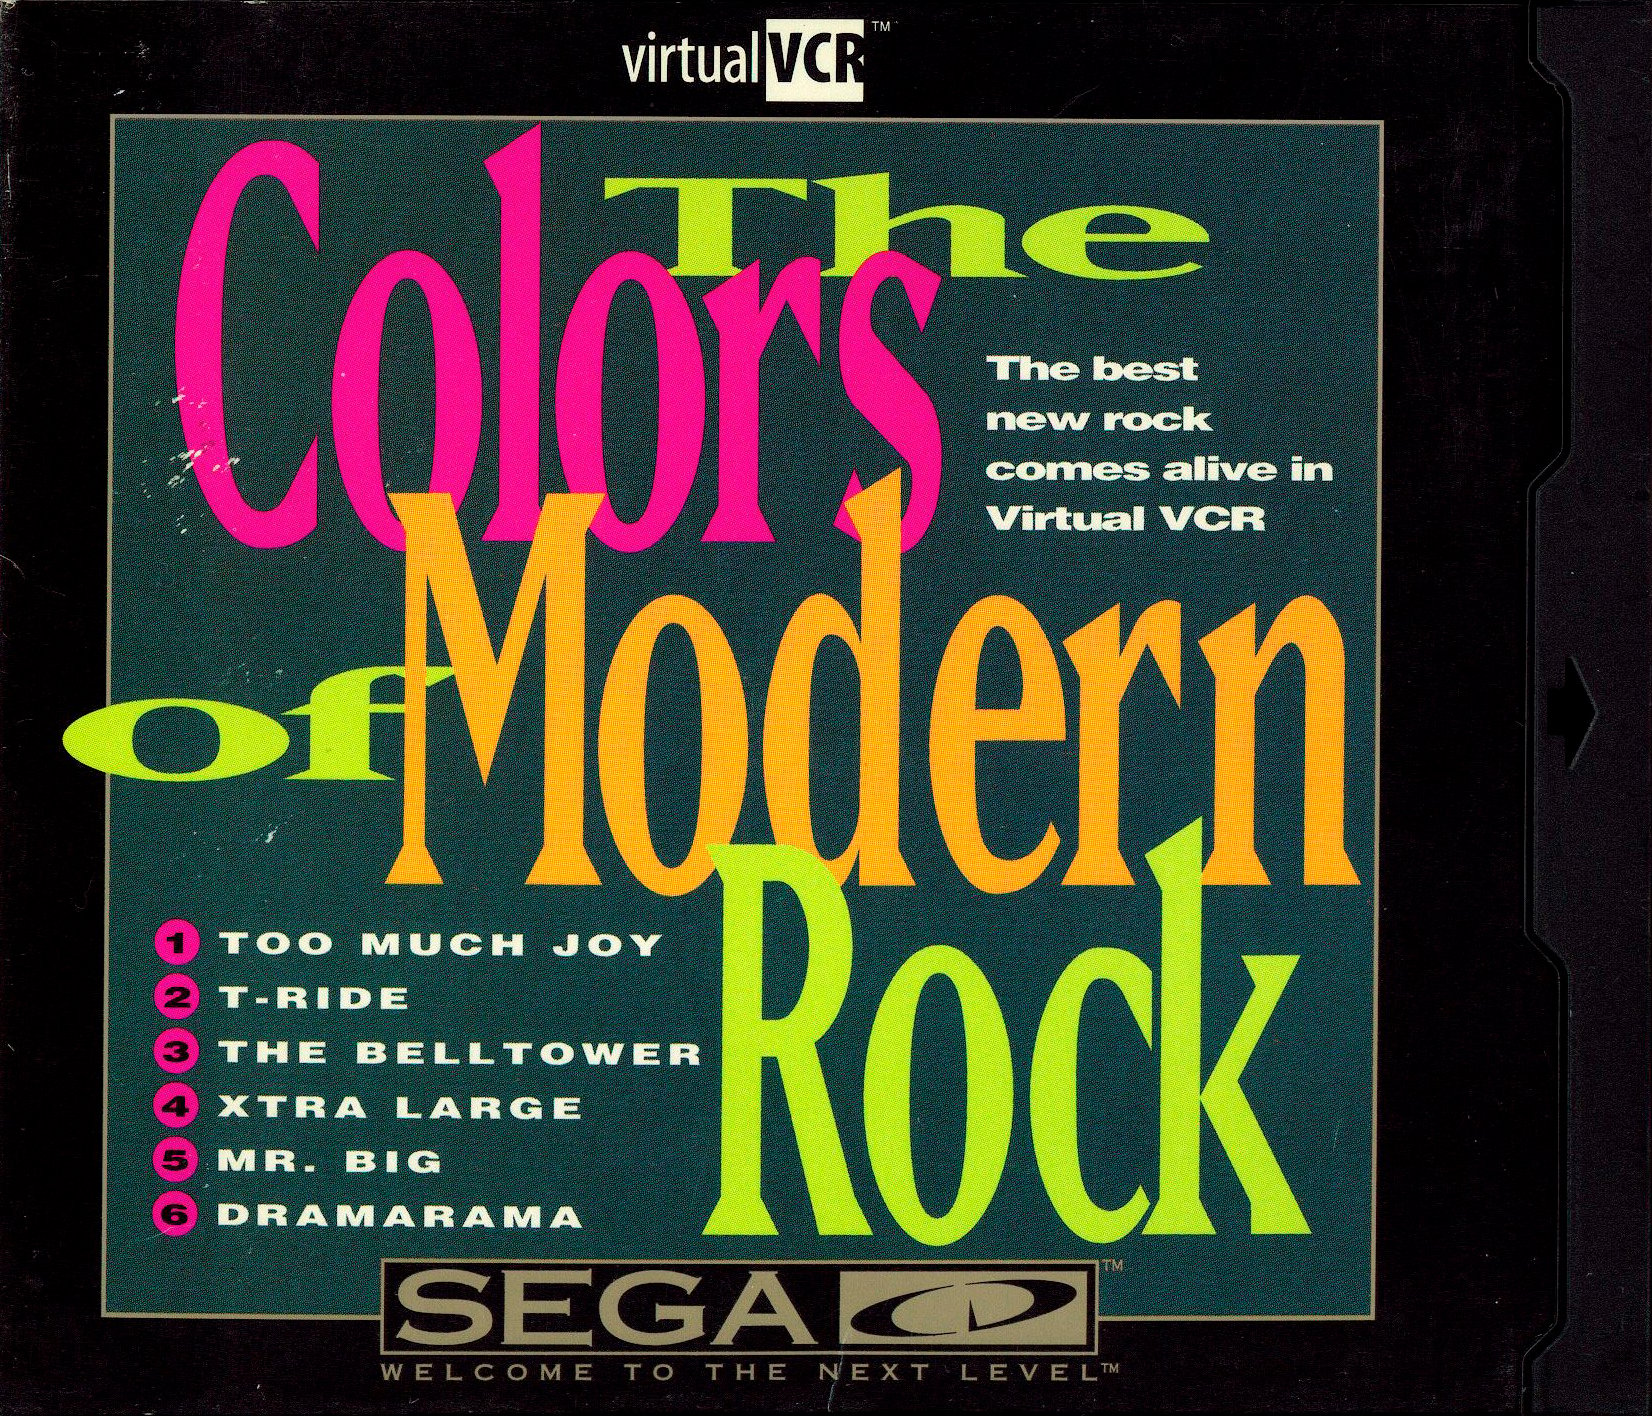 Virtual VCR: The Colors of Modern Rock